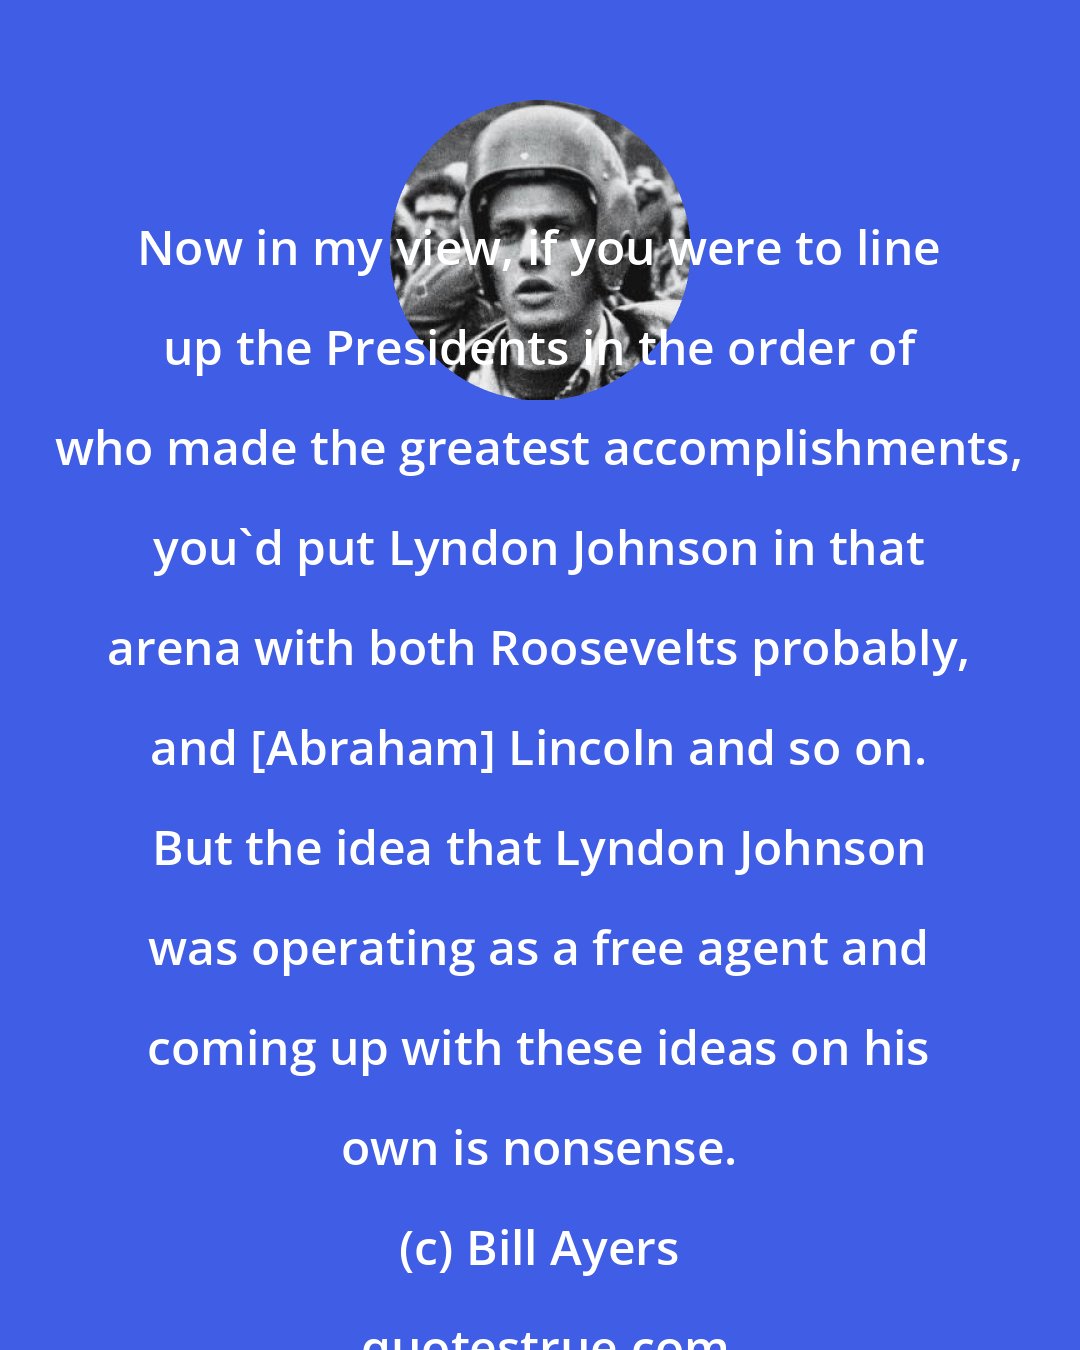 Bill Ayers: Now in my view, if you were to line up the Presidents in the order of who made the greatest accomplishments, you'd put Lyndon Johnson in that arena with both Roosevelts probably, and [Abraham] Lincoln and so on. But the idea that Lyndon Johnson was operating as a free agent and coming up with these ideas on his own is nonsense.